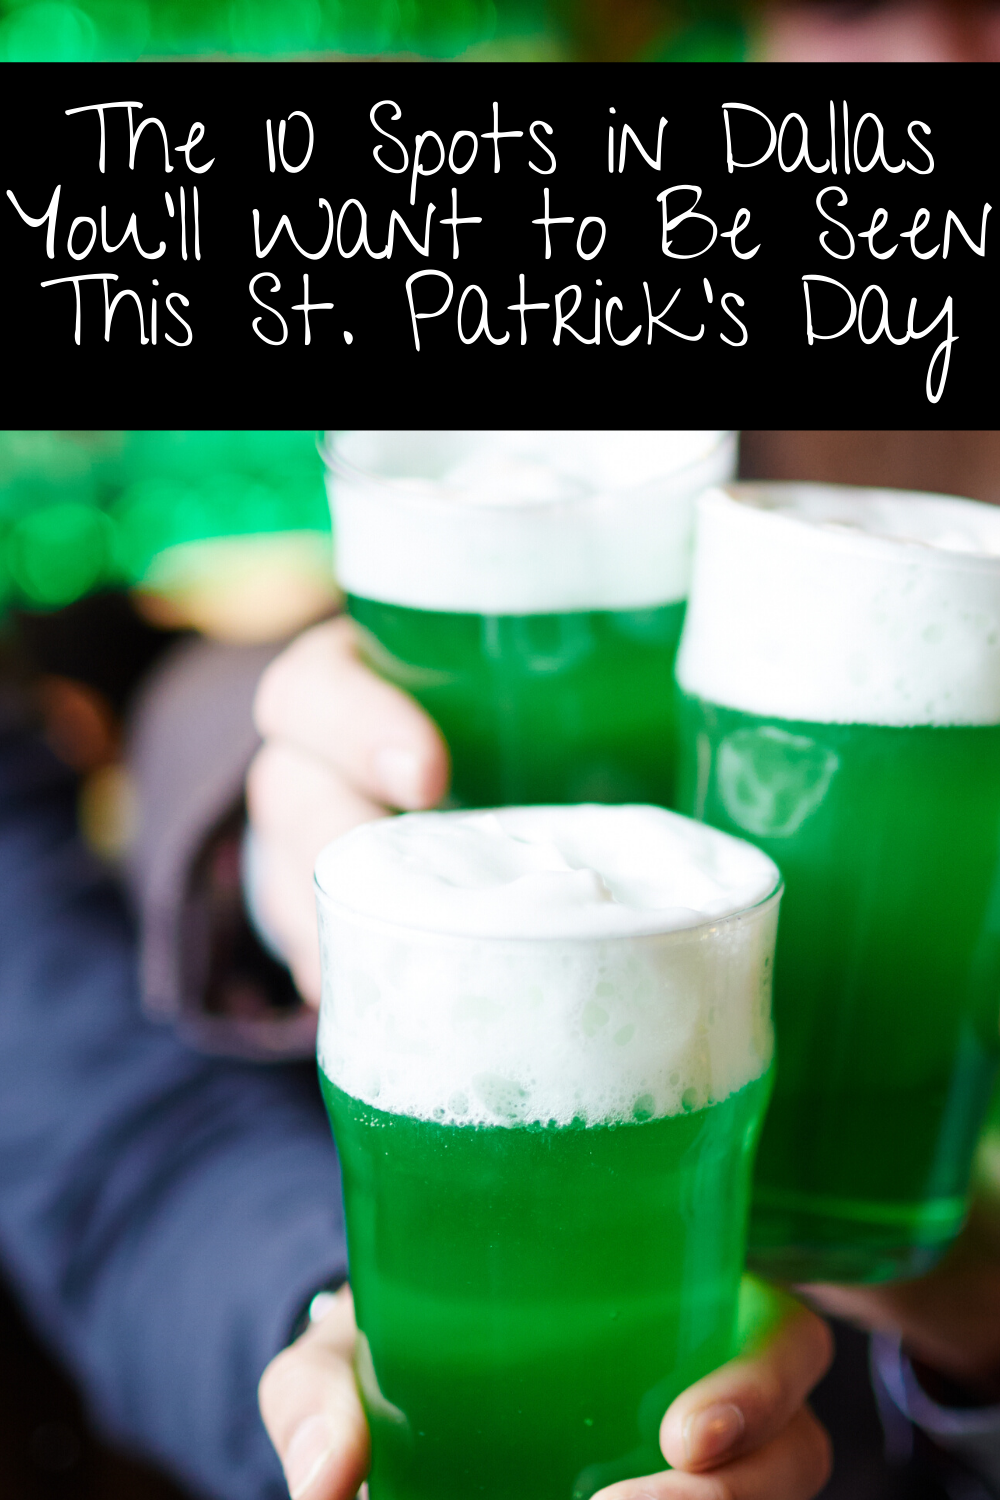 If you are looking for the hot spot for St. Patrick's day in Dallas you can't go wrong with these Irish pubs in Dallas. It's where all the fun happens on St. Patrick's Day!